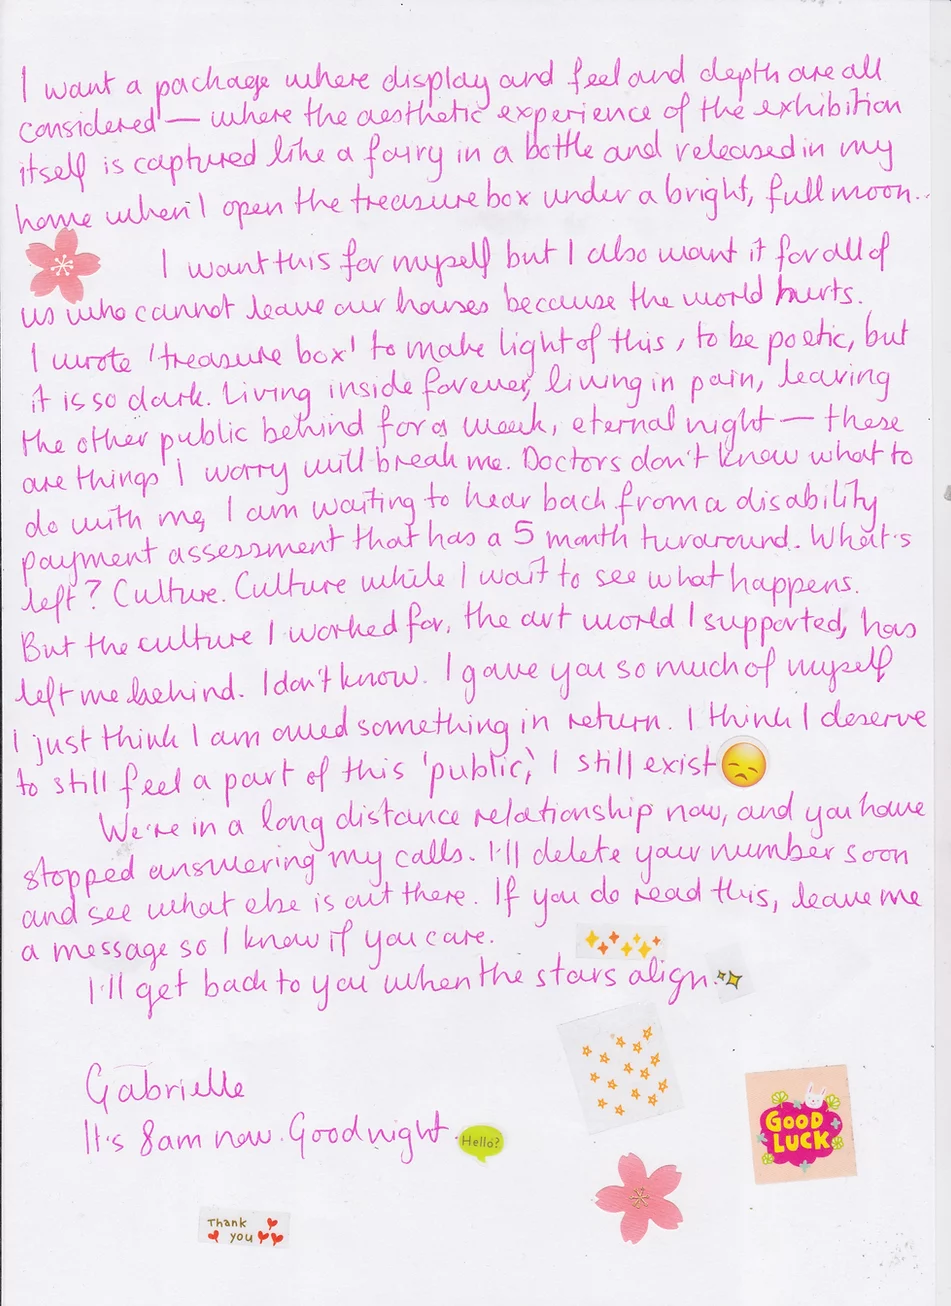 the final page has stickers with stars, a worn out emoji face, a speech bubble that says hello question mark, and one that says thank you and good luck